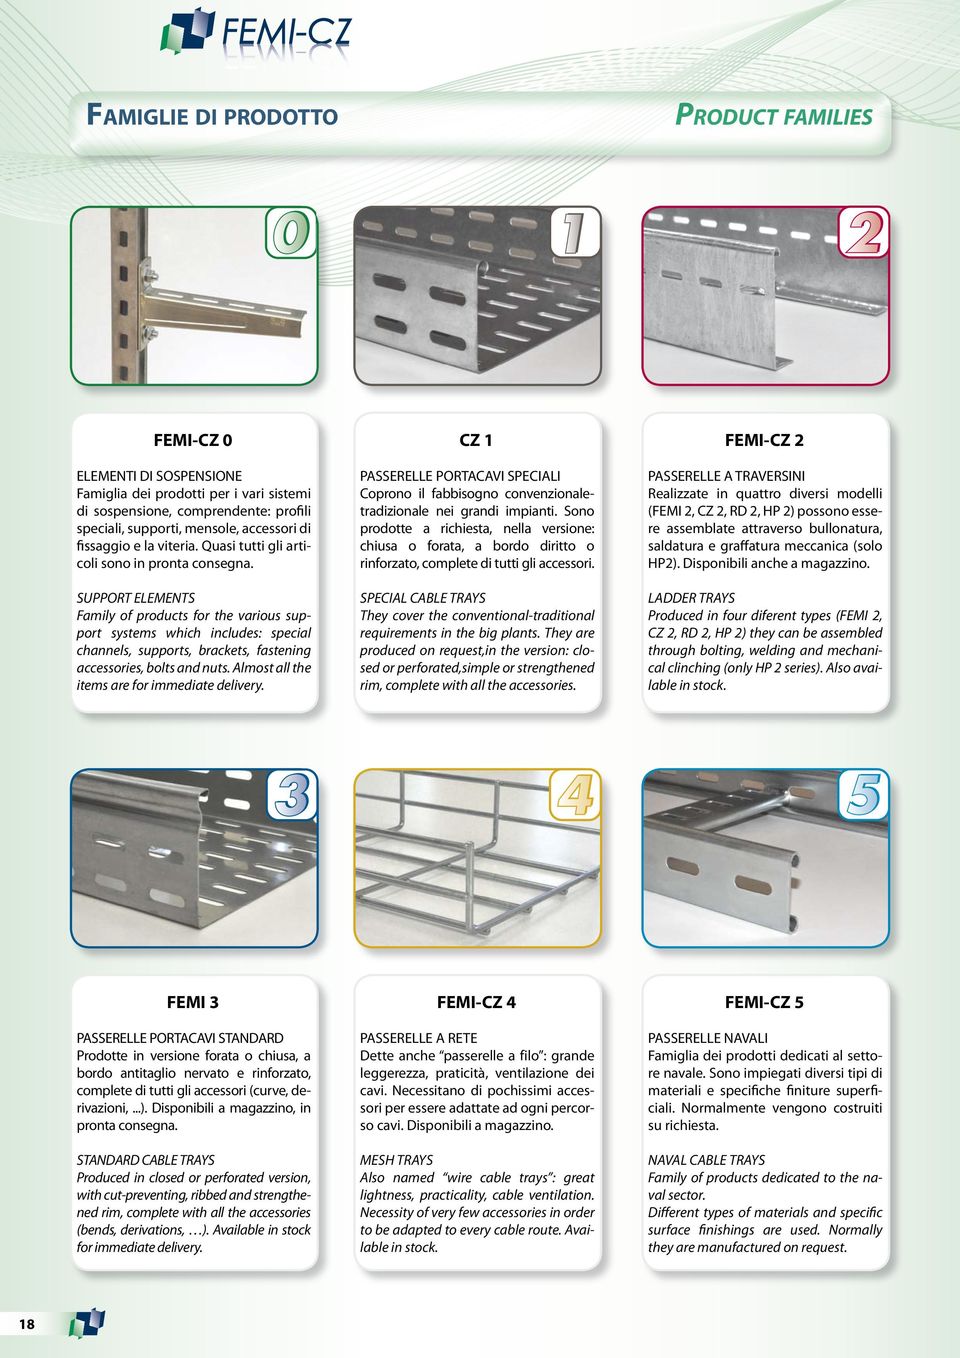 SUPPORT ELEMENTS Family of products for the various support systems which includes: special channels, supports, brackets, fastening accessories, bolts and nuts.